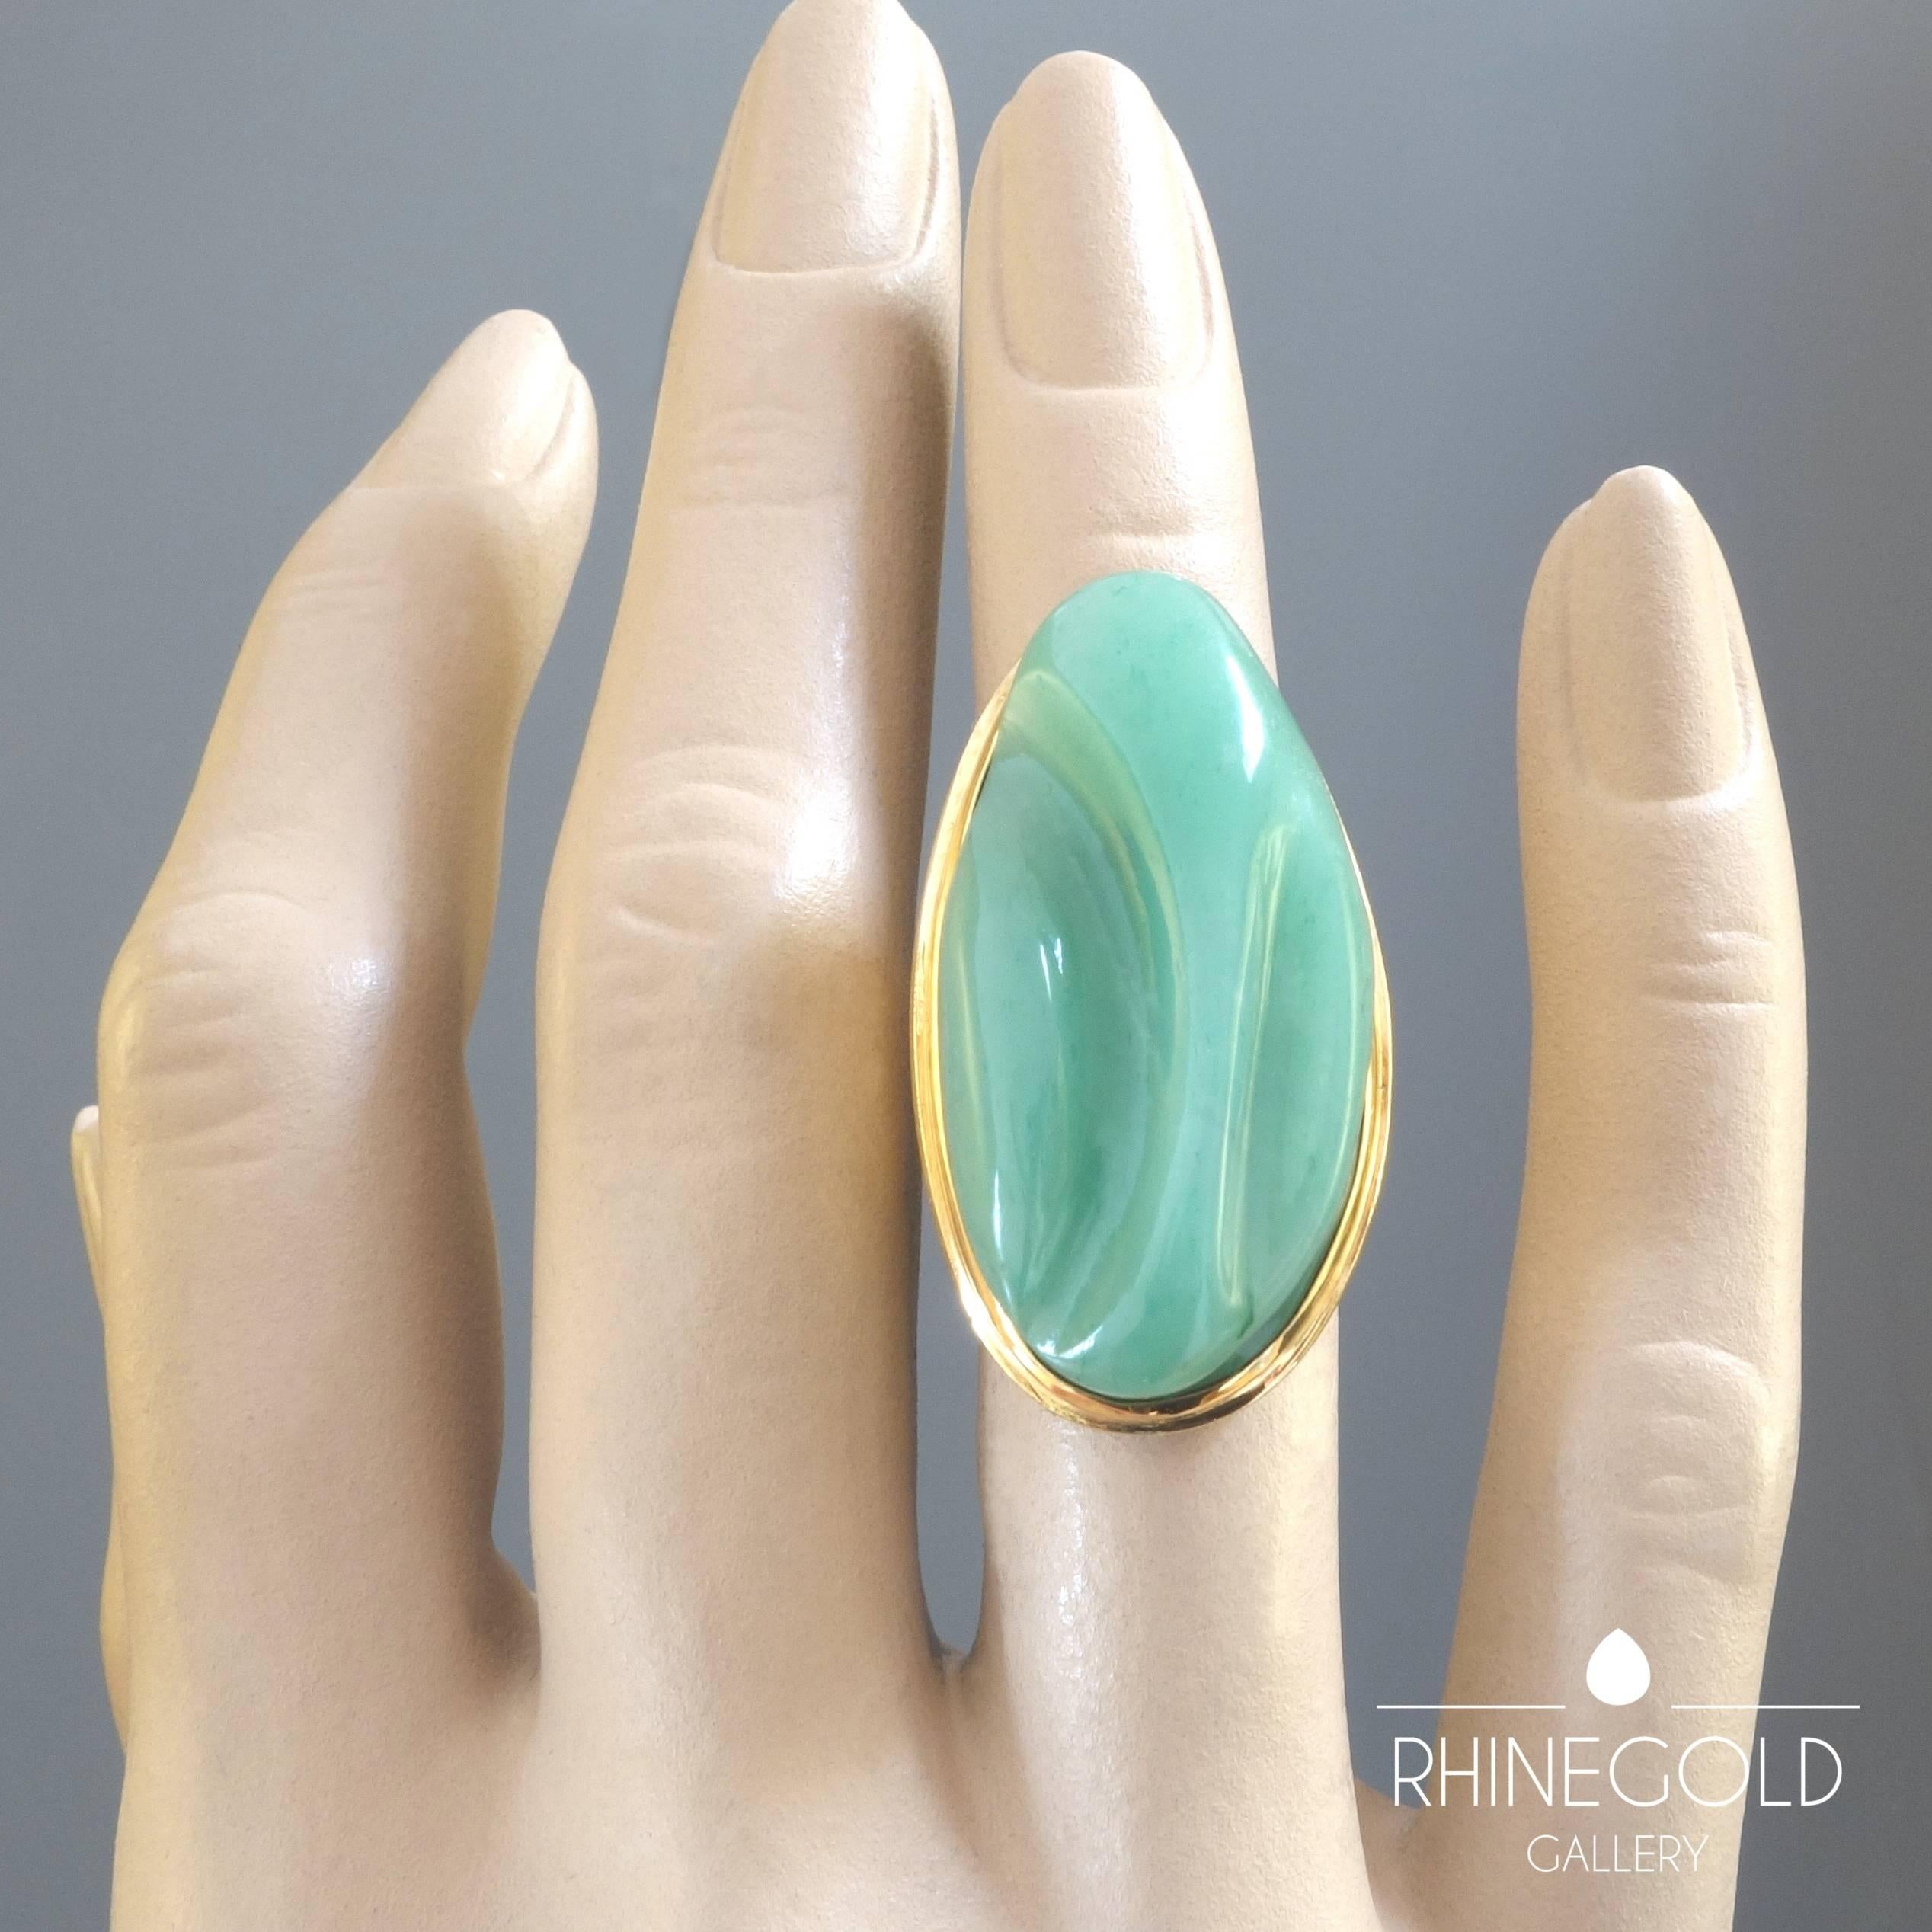 1970s Burle Marx Forma Livre Huge Modernist Chrysoprase Gold Cocktail Ring
18k yellow gold, chrysoprase
Ring head 3.5 cm by 2.5 cm (approx. 1 3/8” by 1”)
Ring size: Ø 15.9 mm = EU 50 / US 5+ / ASIA 9
Weight approx. 21 grams
Marks: maker’s marks (on